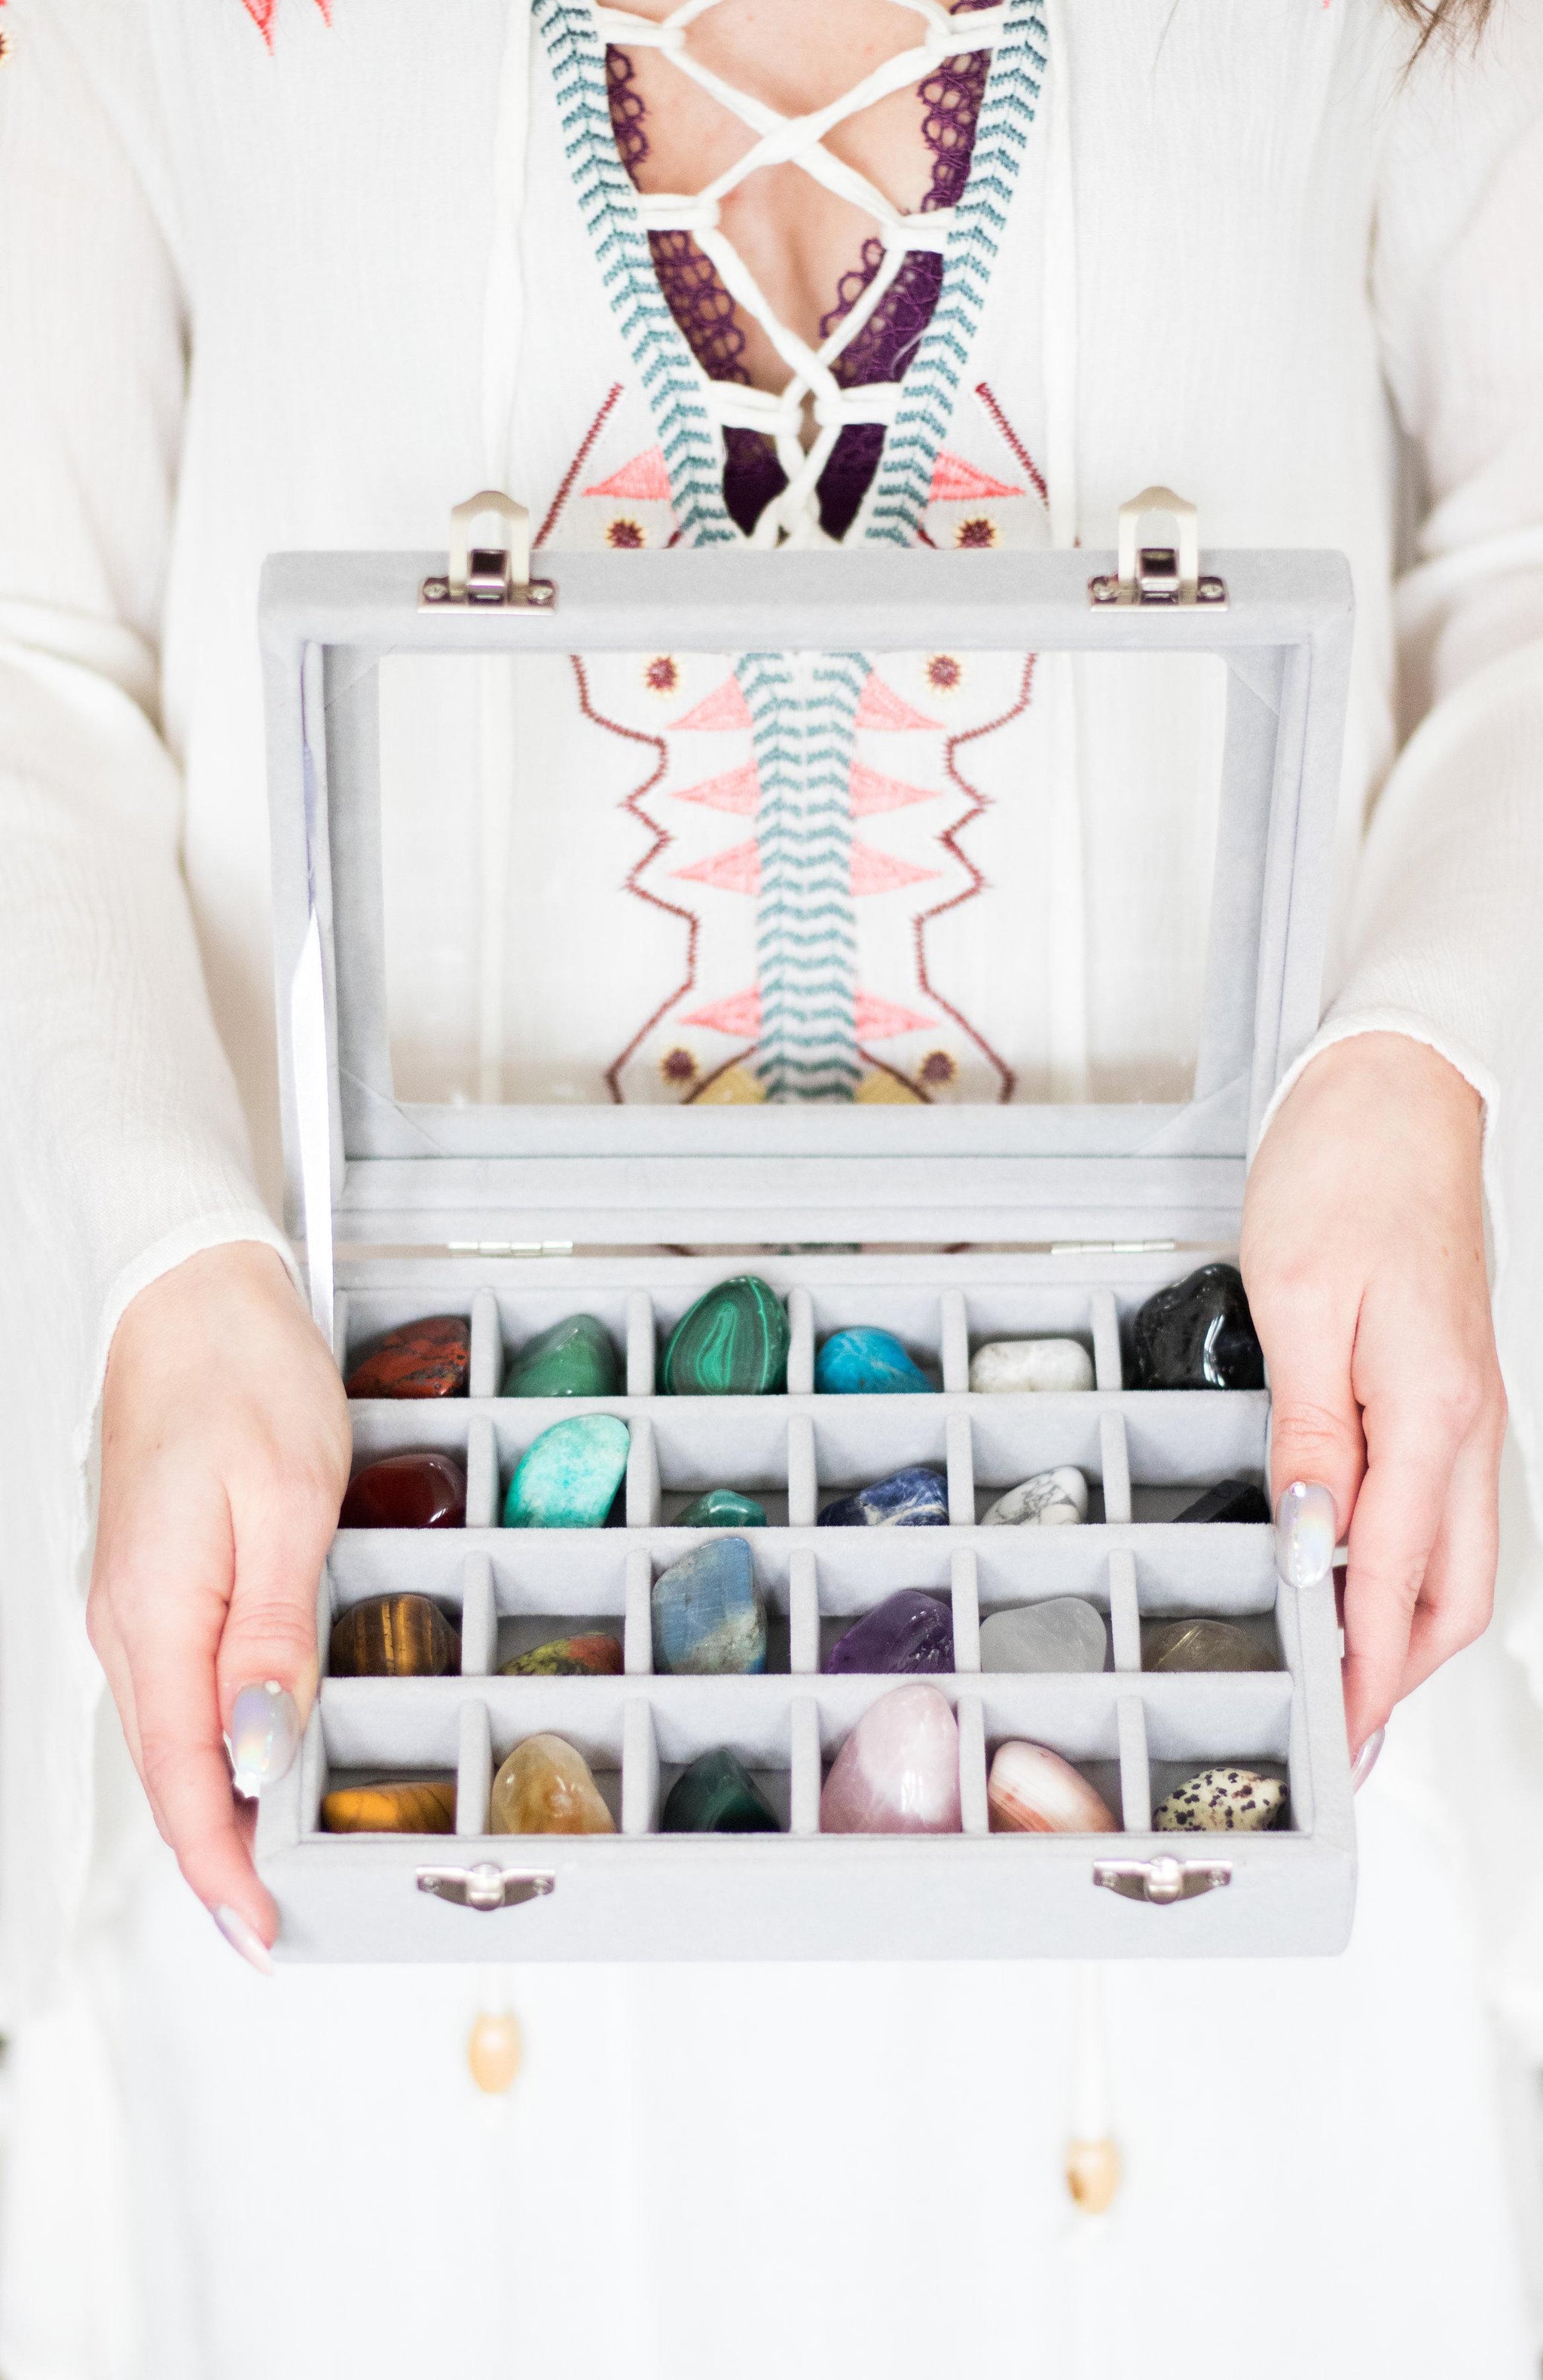 Ultimate Crystal Set with Organizer Box - Rocks with Sass